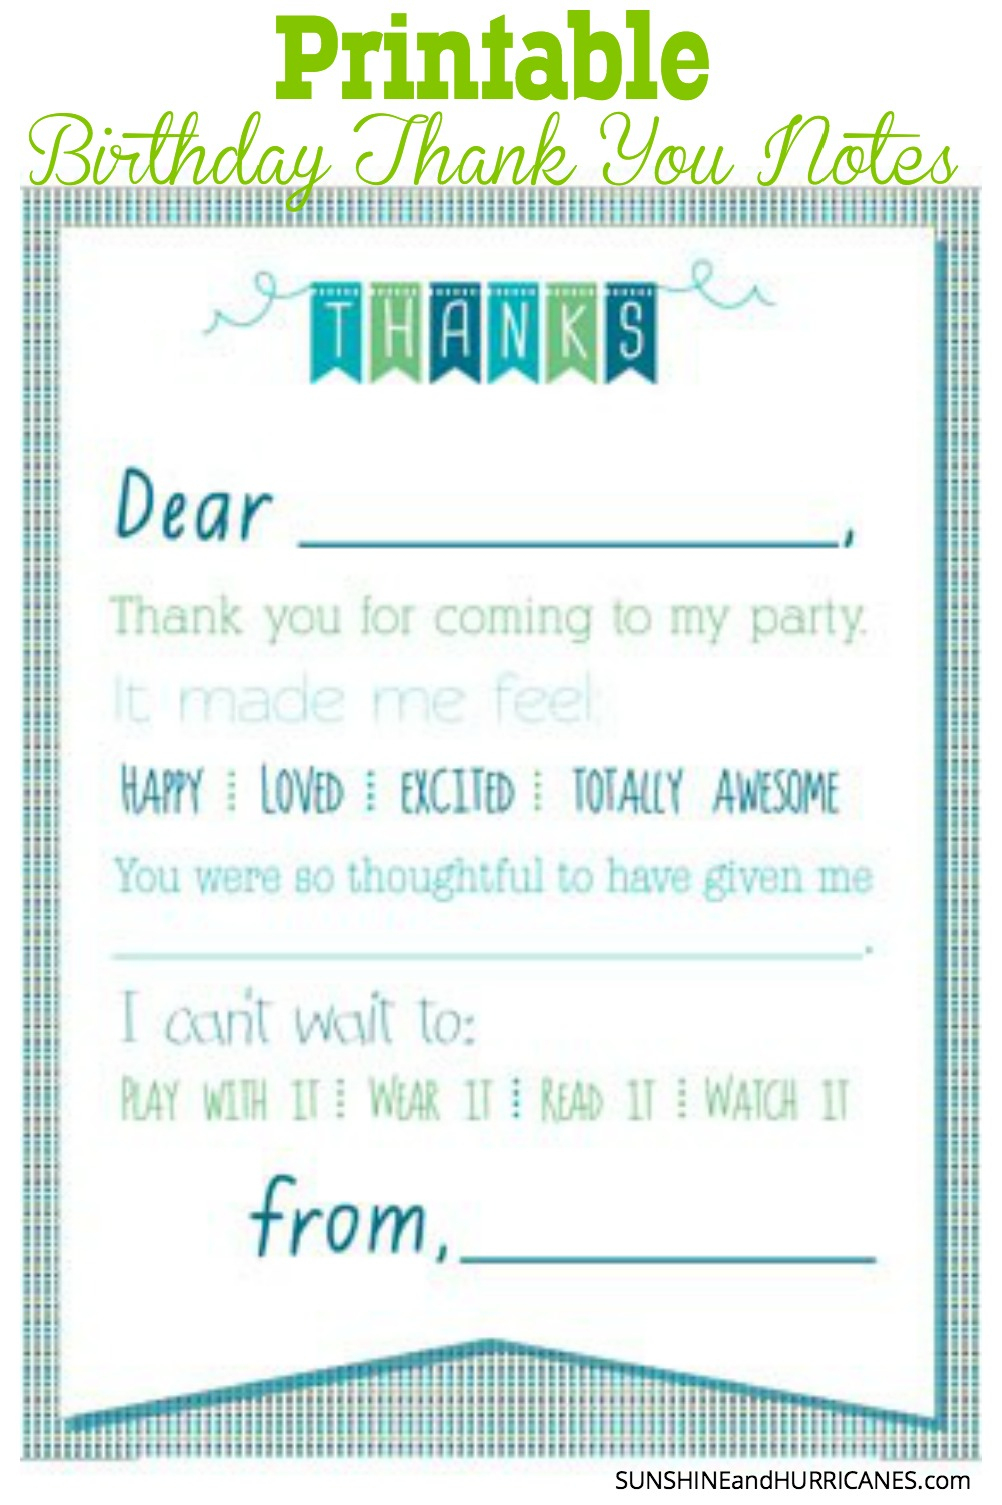 Printable Birthday Thank You Notes - Free Printable Soccer Thank You Cards